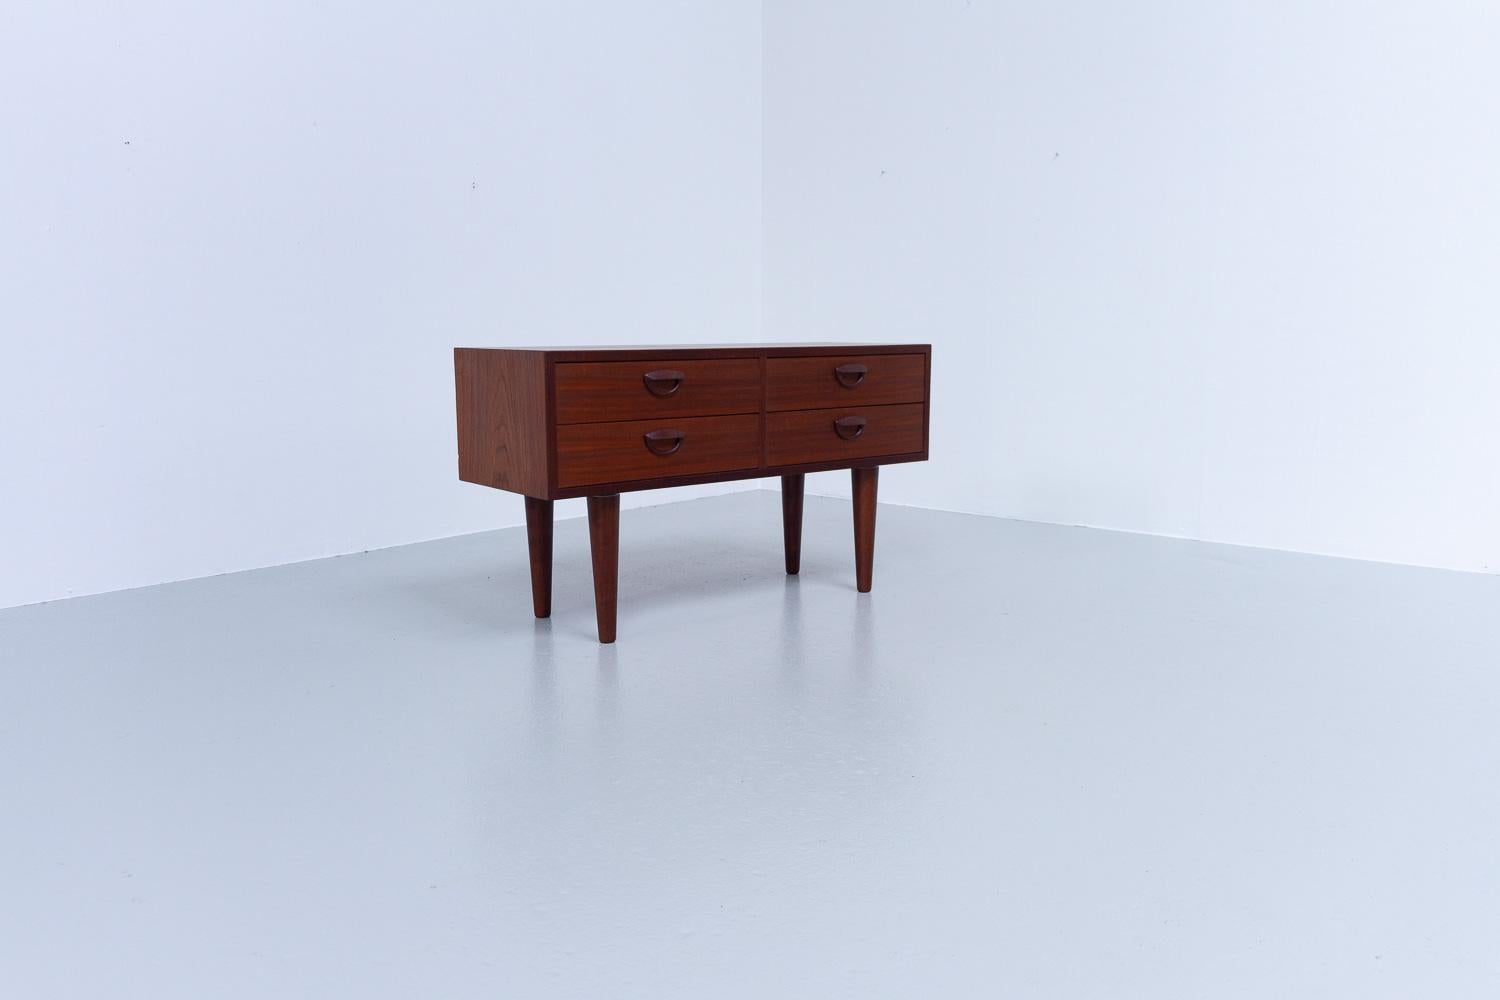 Small Danish Teak Chest of Drawers by Kai Kristiansen for FM, 1960s.
Vintage Danish chest of drawers produced by Feldballes Møbelfabrik Denmark as part of the FM Reol System. Designed by architect Kai Kristiansen. 
This small cabinet features four